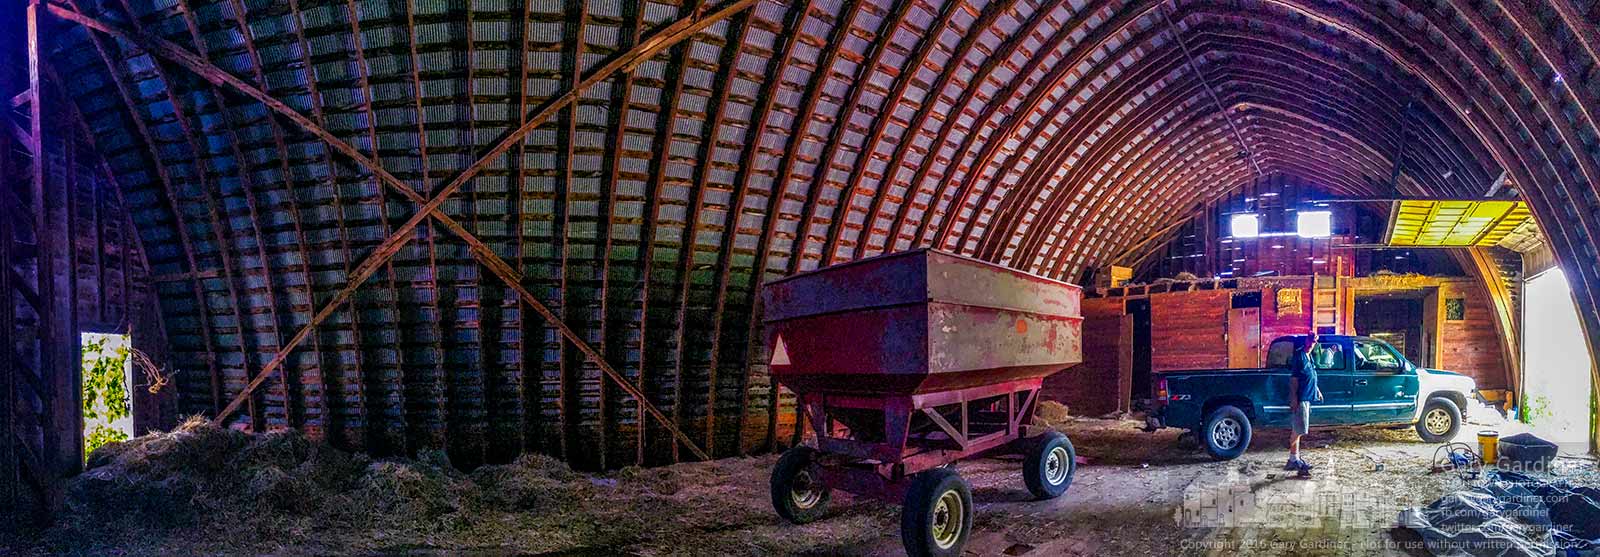 Farmers hook up the last trailer stored in the Braun Farm barn so they can take it back to their farm for storage and use this fall. My Final Photo for August 29, 2016.